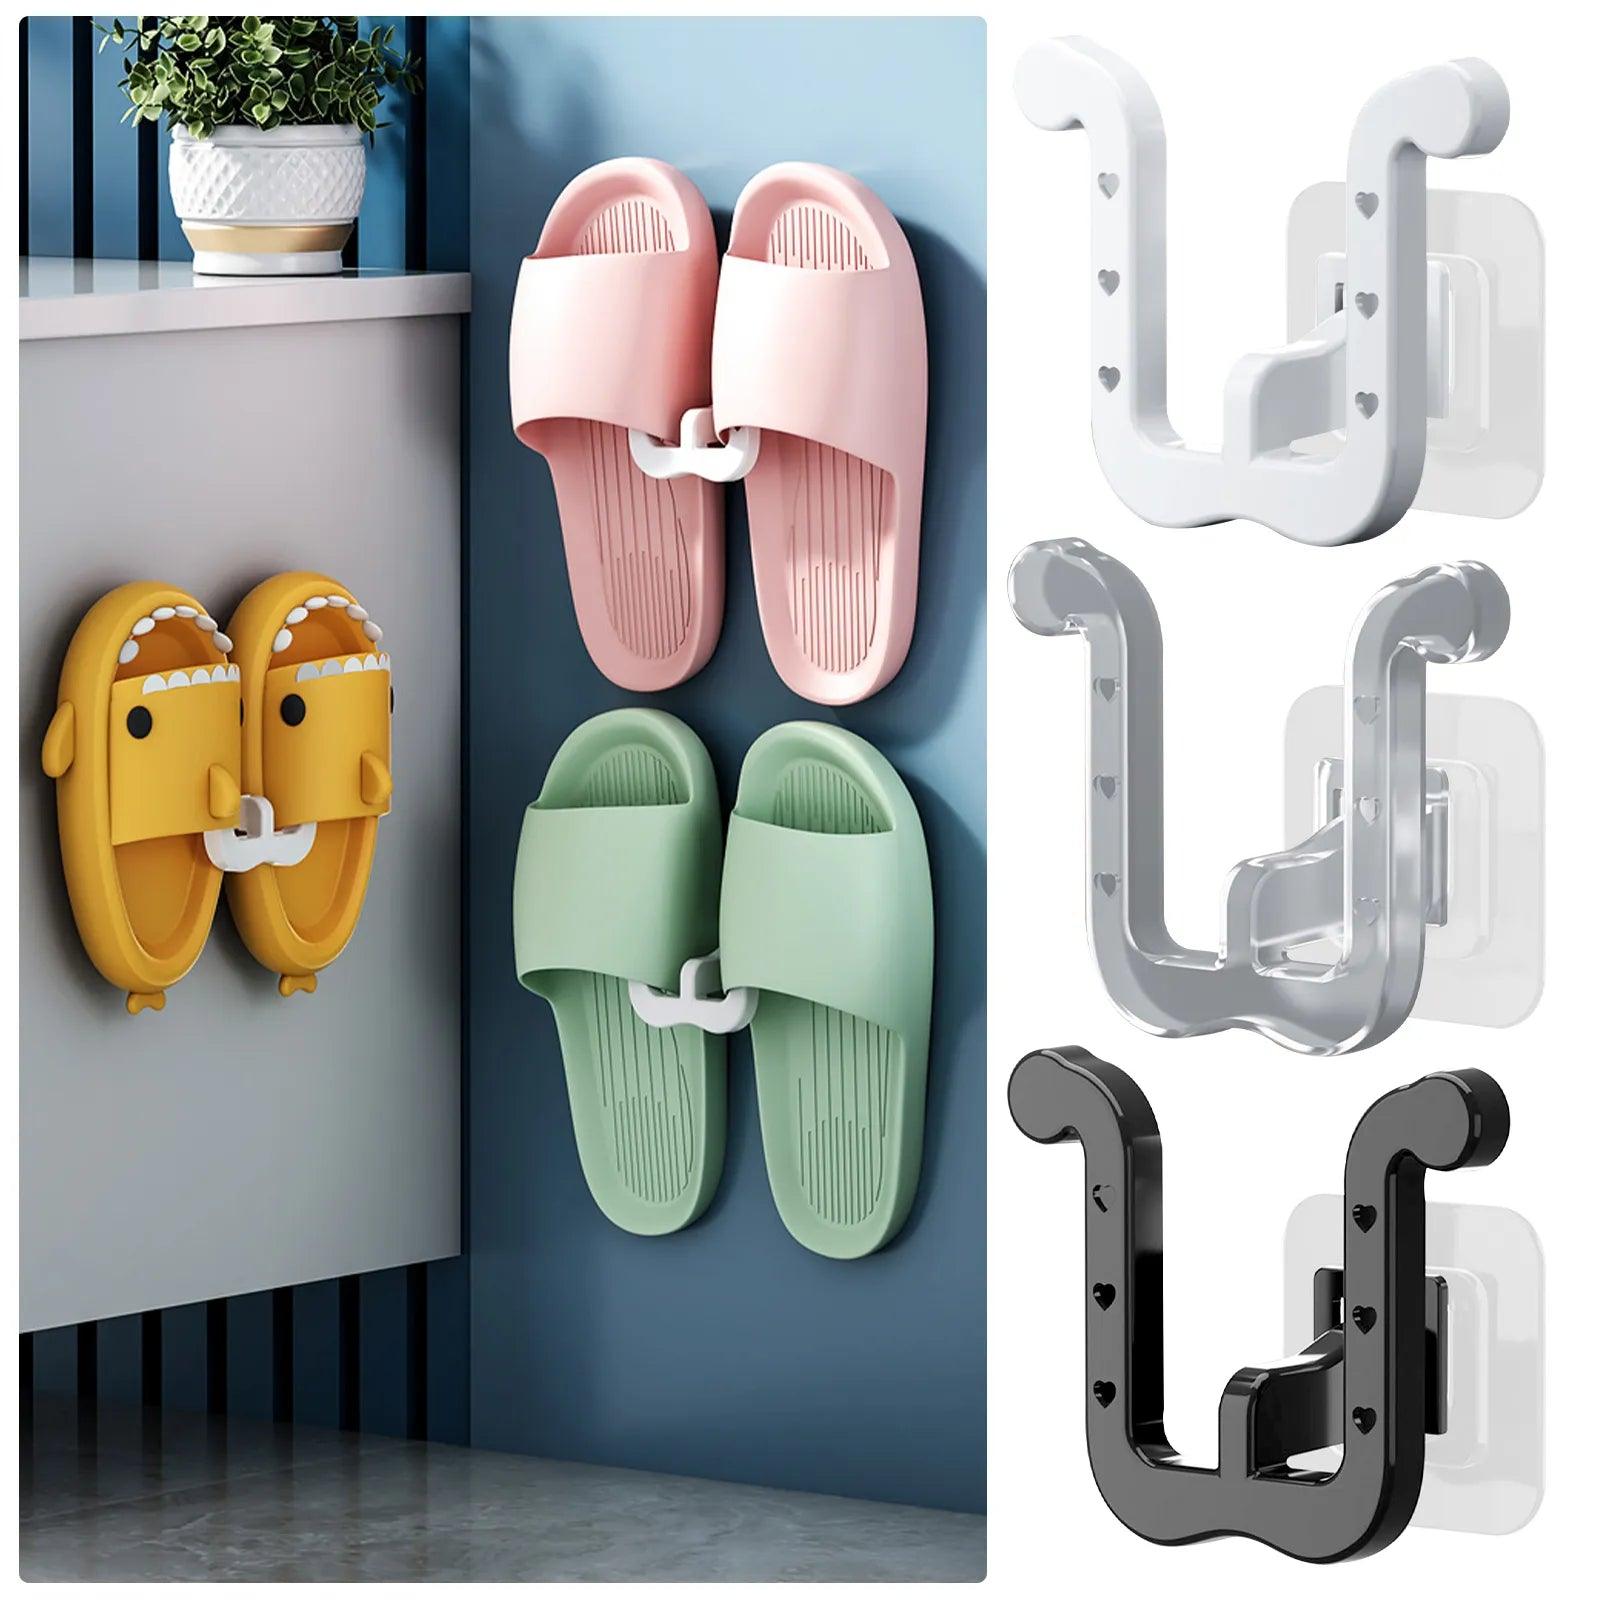 Slippers Organizer Wall Mount Shoe Storage Rack with Drainage - Bathroom & Bedroom Space Saver  ourlum.com   